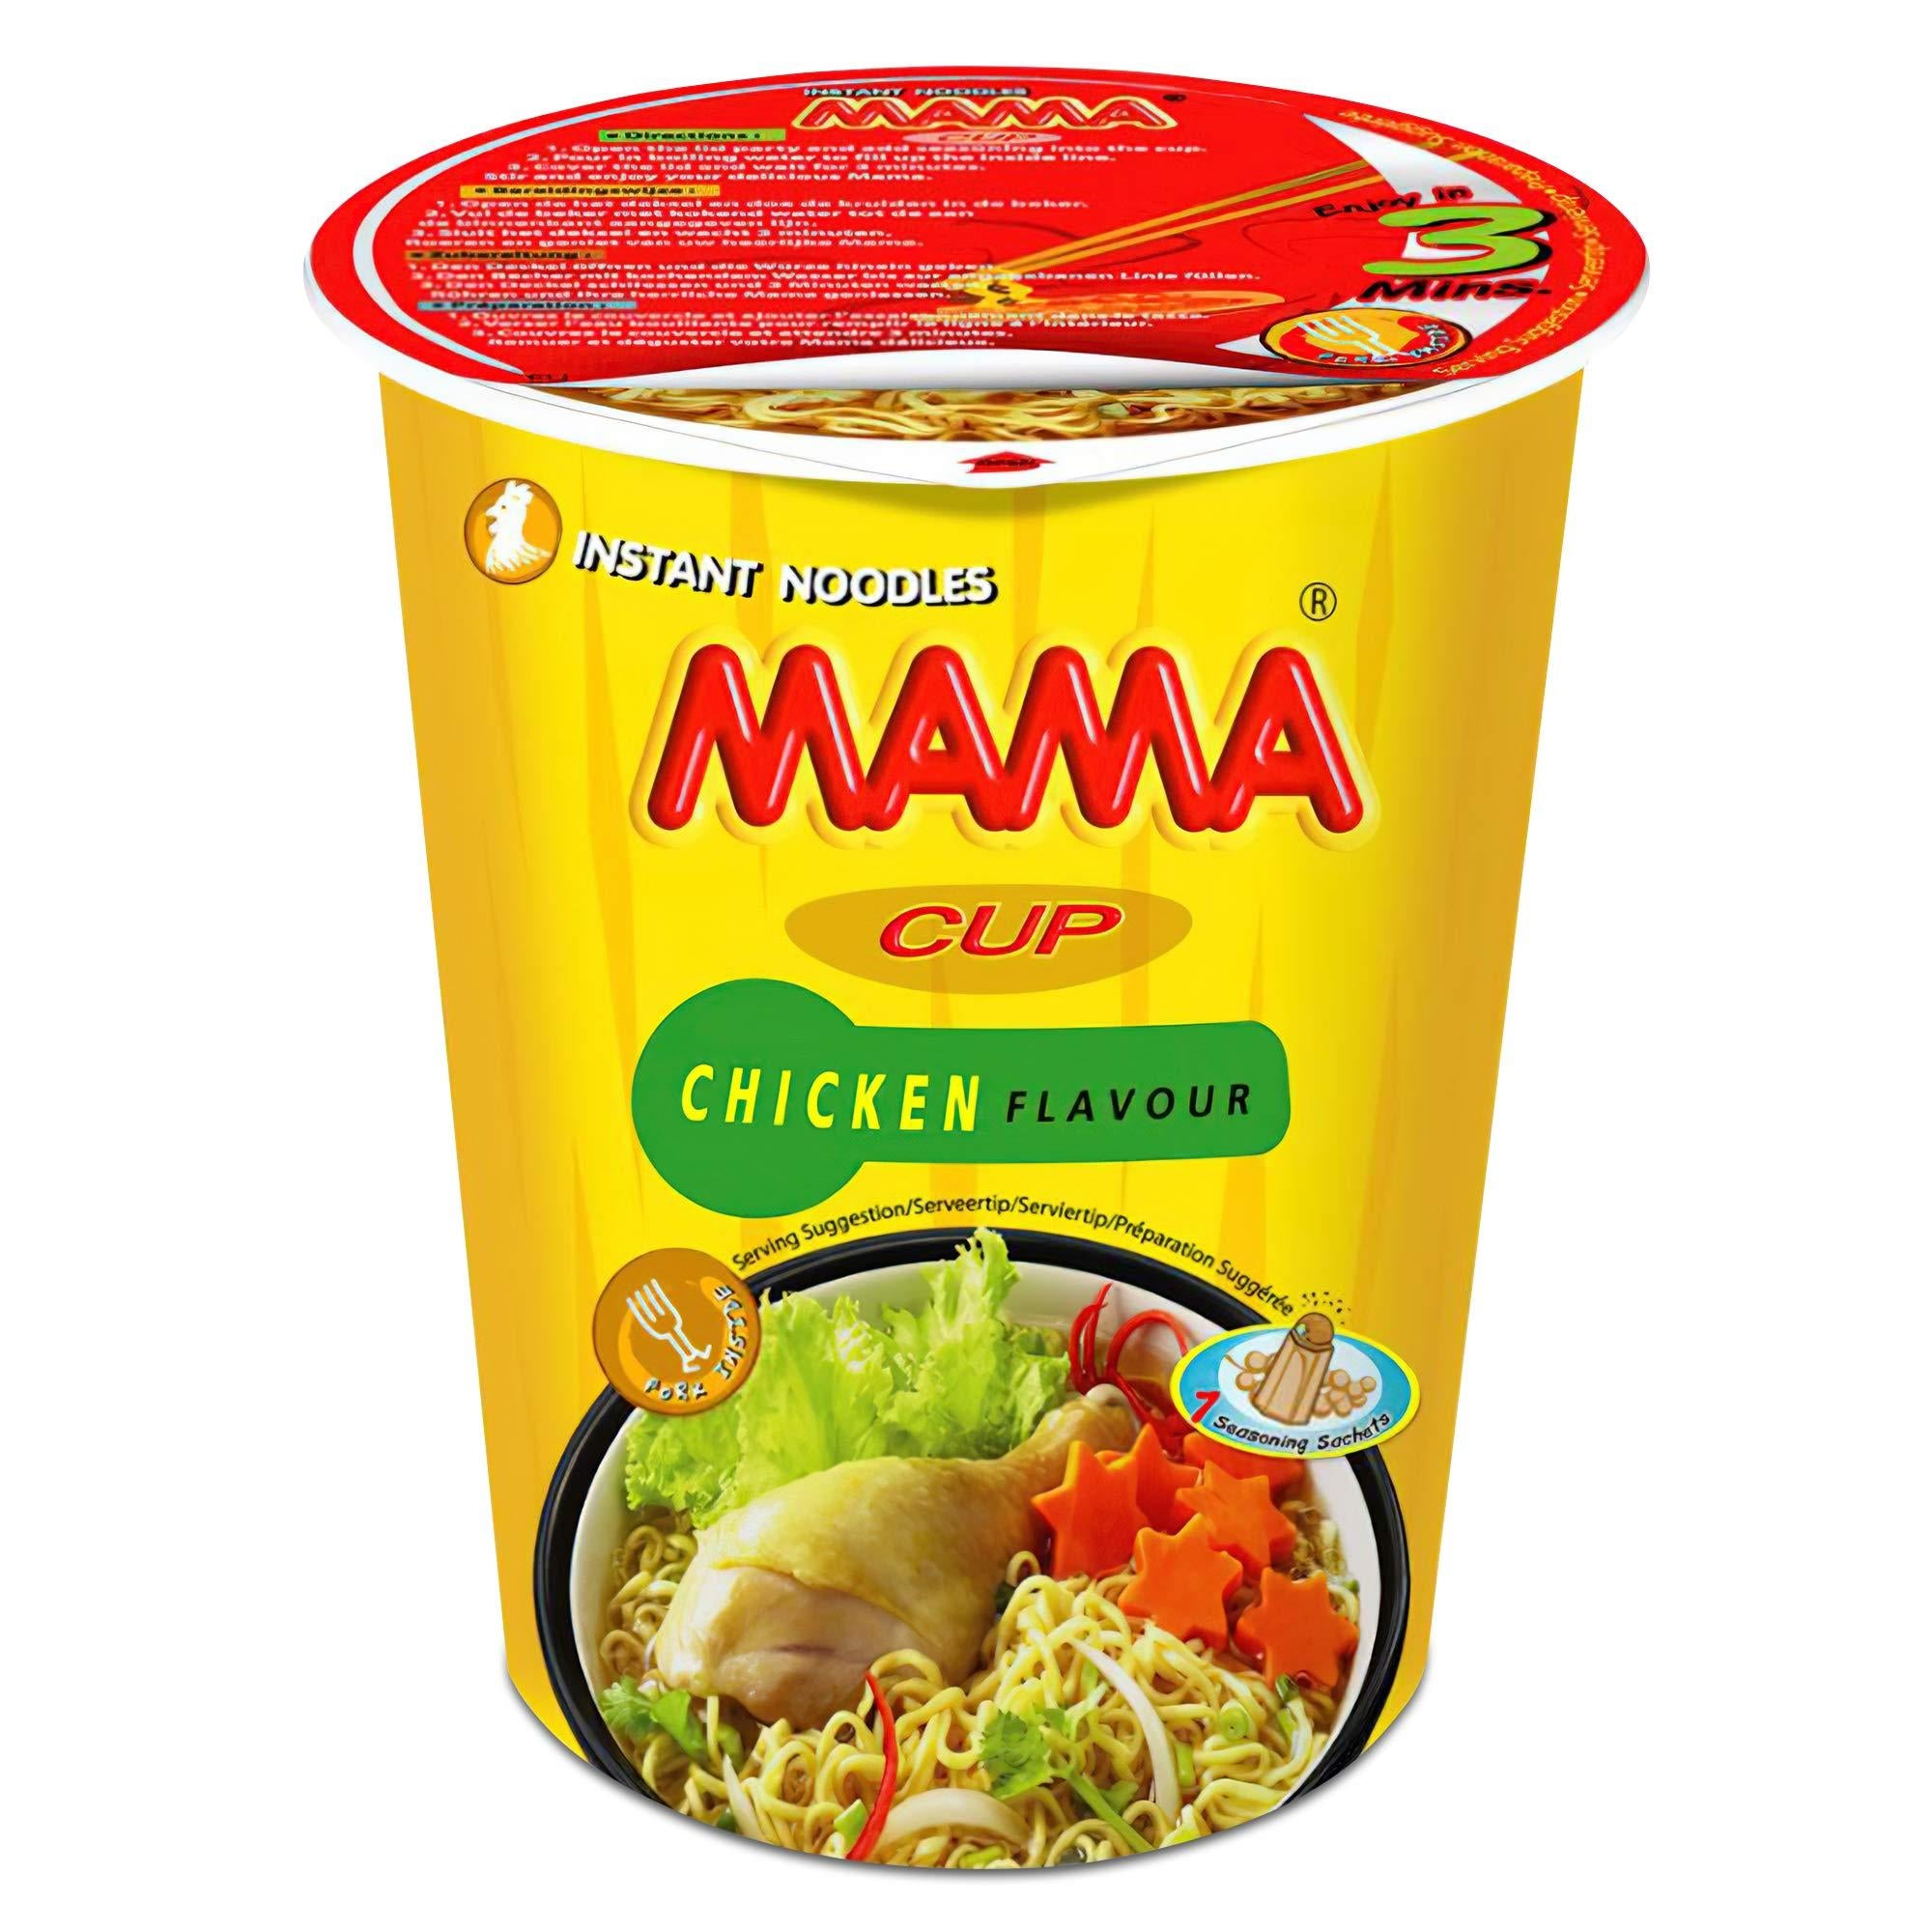 MAMA Noodles Chicken Instant Cup of Noodles with Delicious Thai Flavors, Hot And Spicy Noodles with Chicken Soup Base, No Trans Fat with Fewer Calories Than Deep Fried Noodles (Chicken Flavor, 6 Pack)